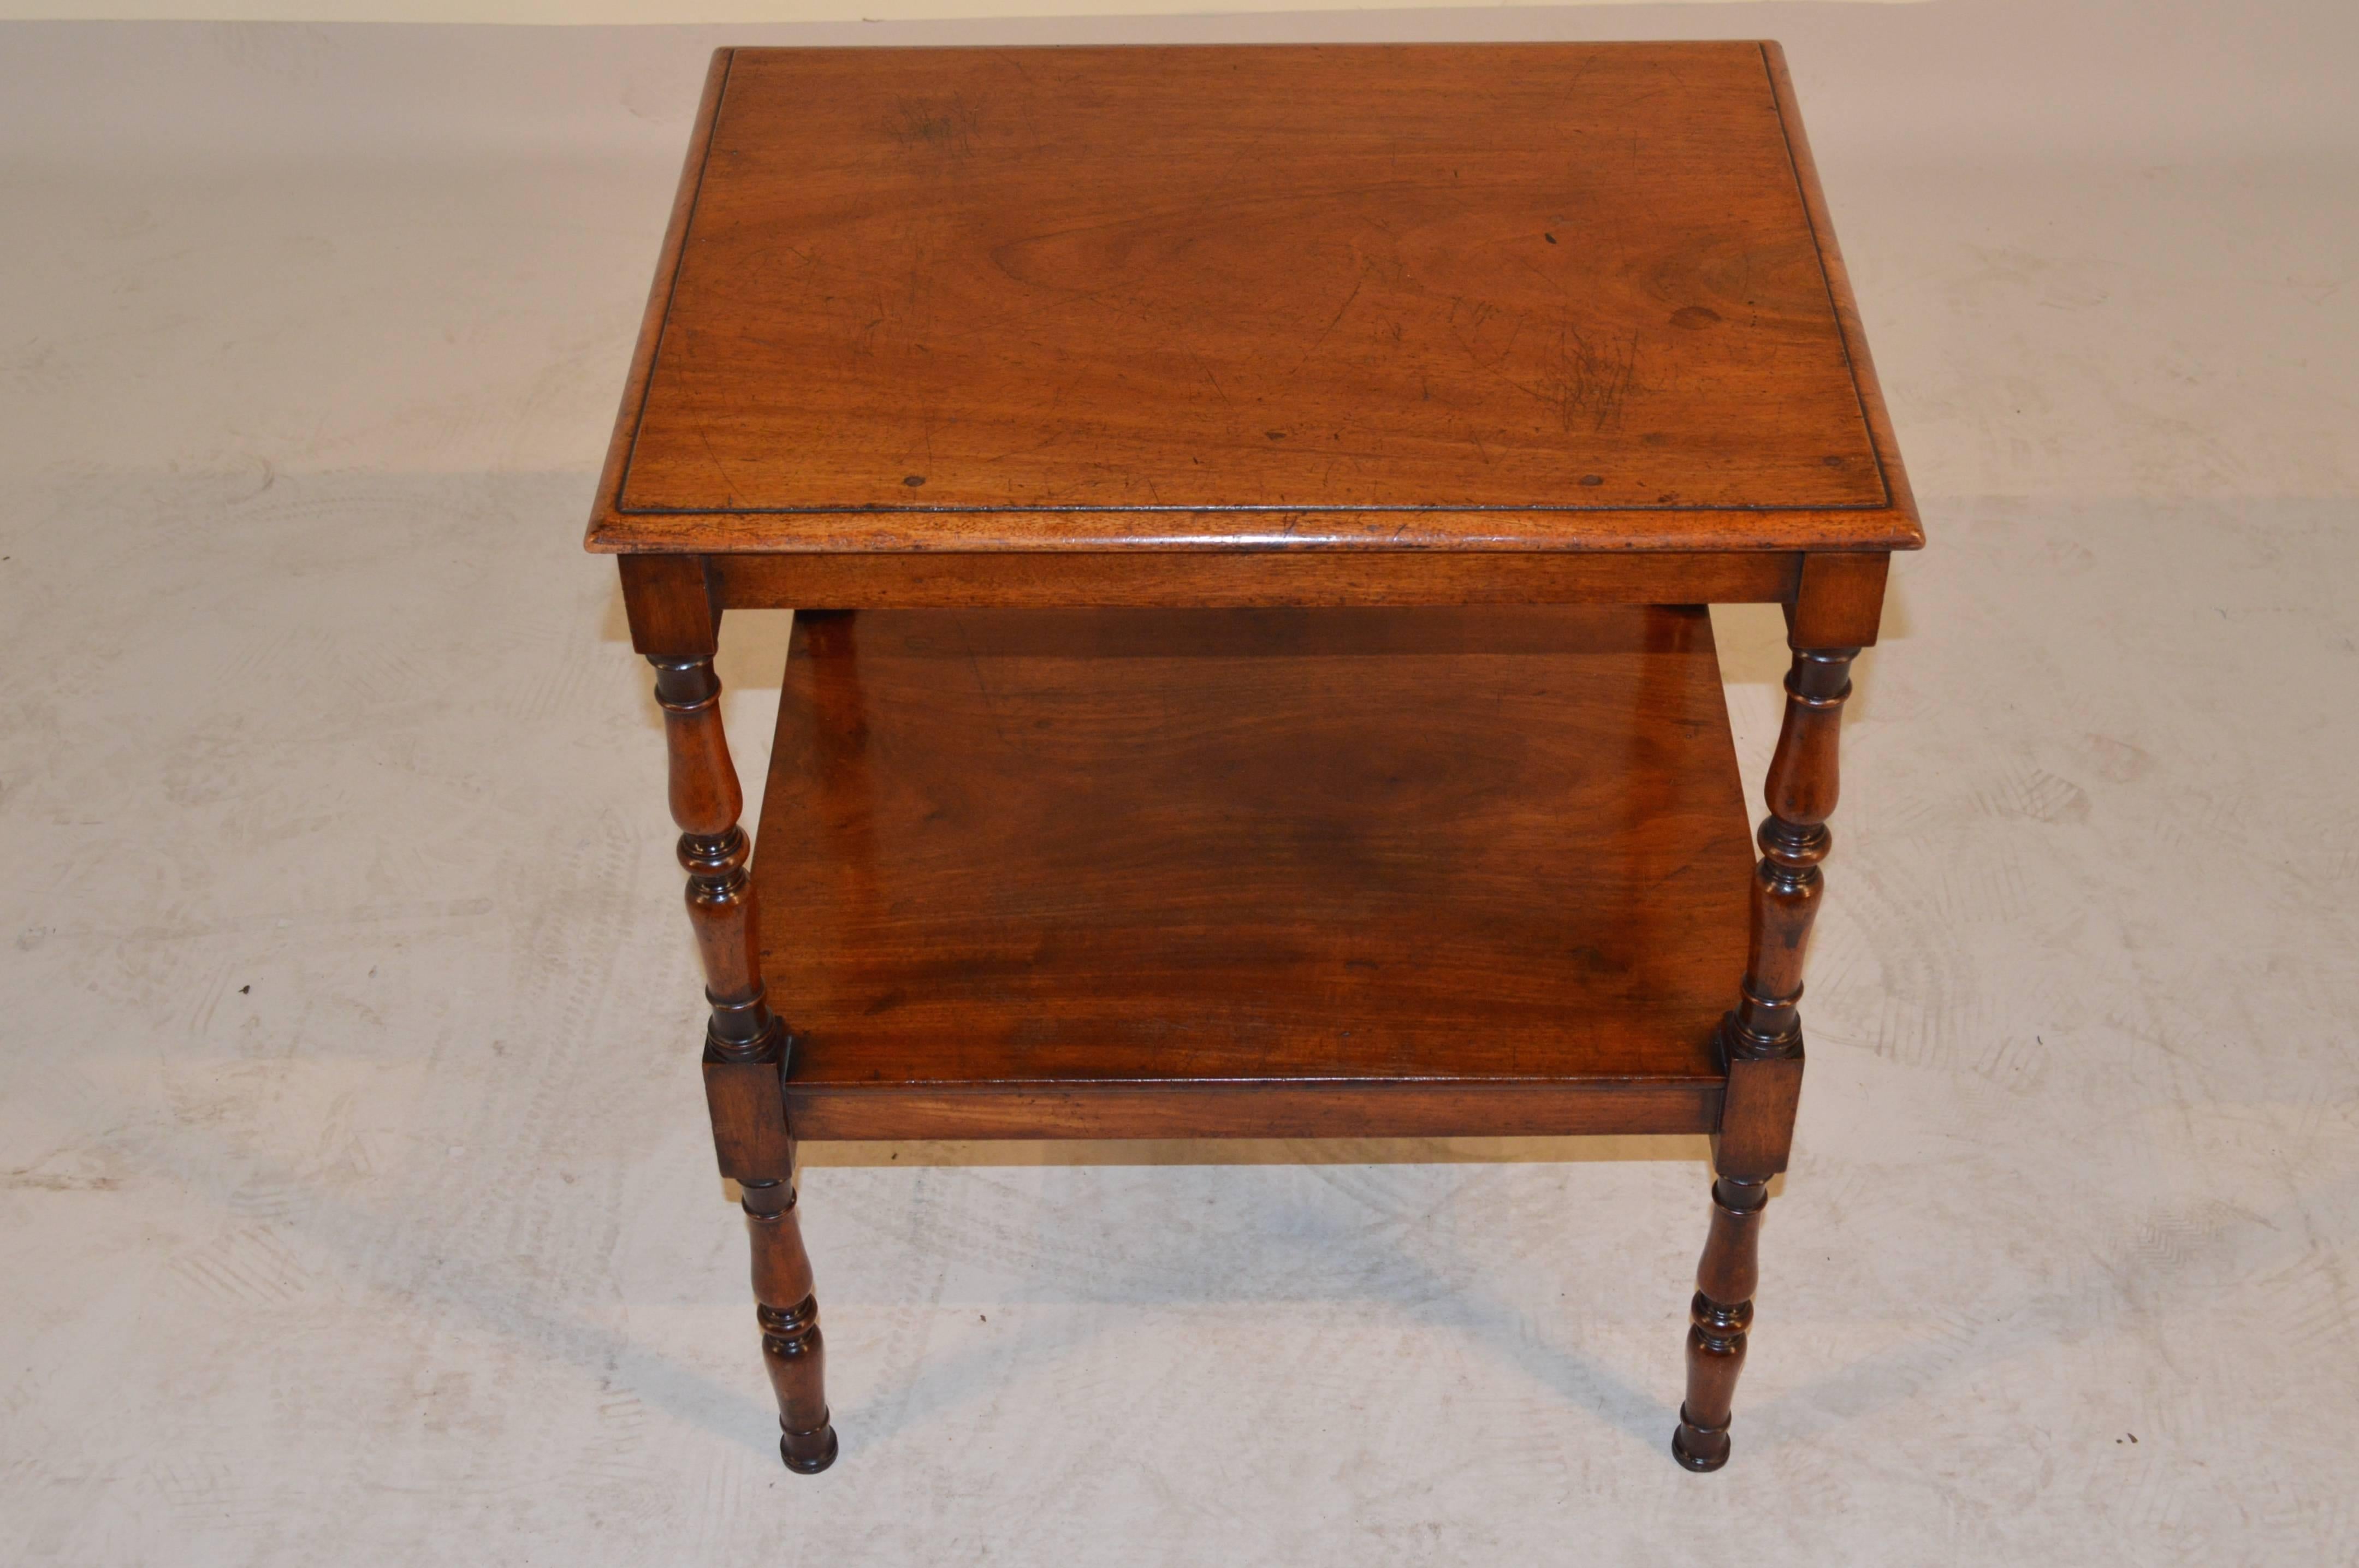 Turned 19th Century English Mahogany Tiered Side Table